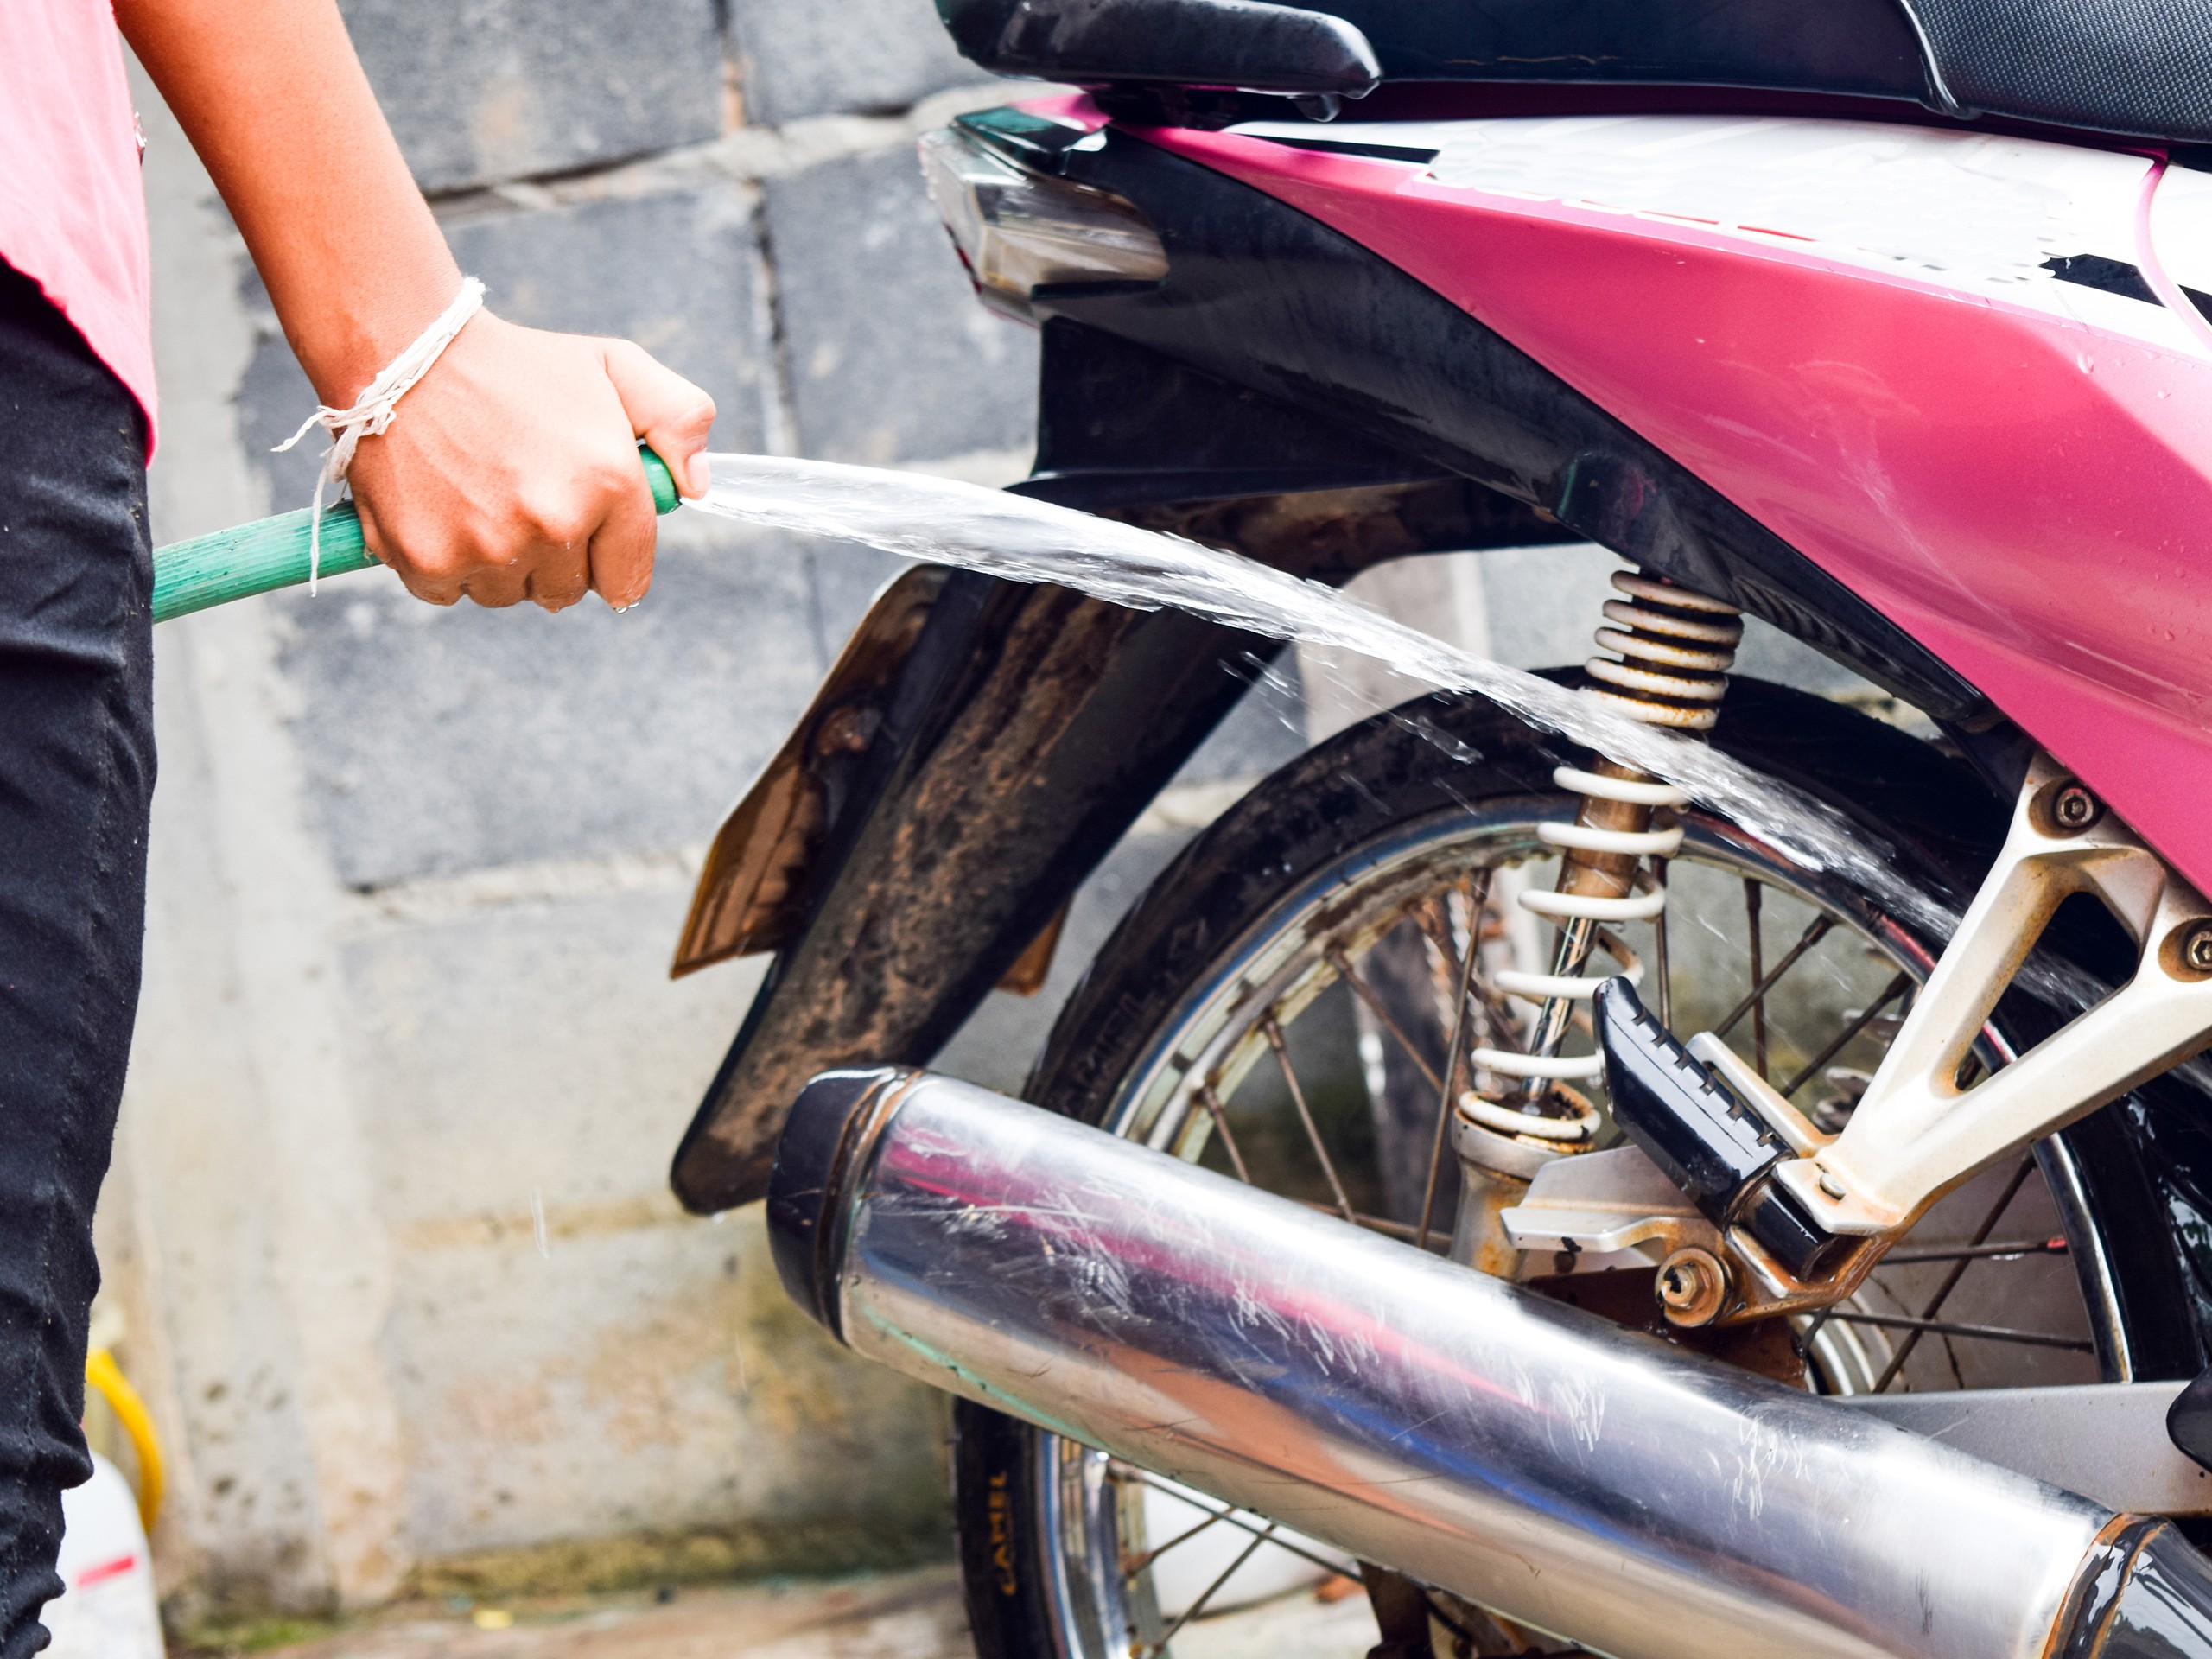 S100 Motorcycle Cleaner and Degreaser Kit